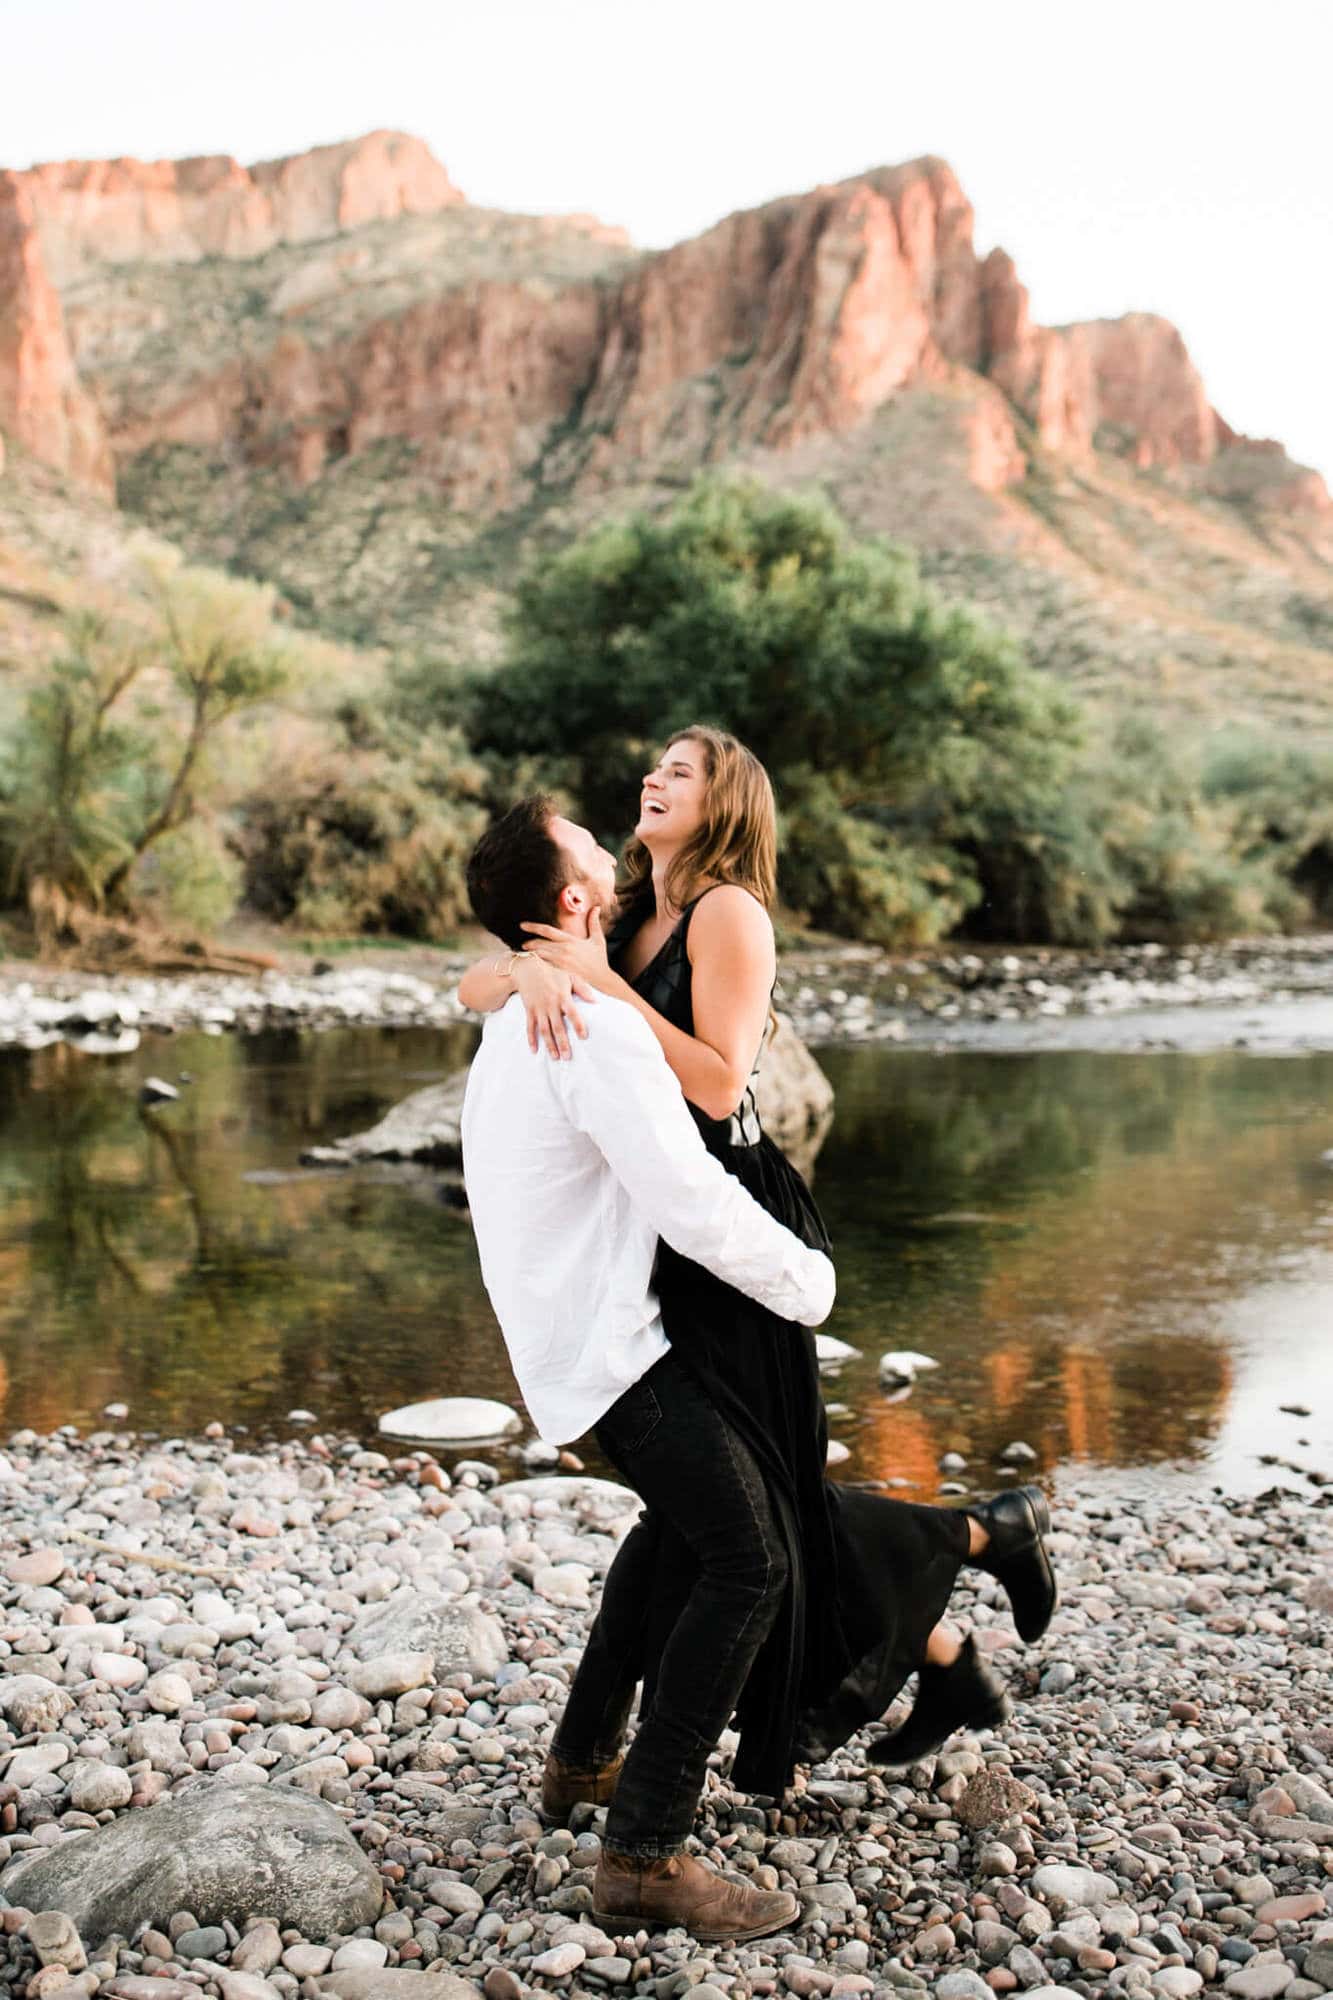 The couple walks along the Salt River during their desert engagement session.